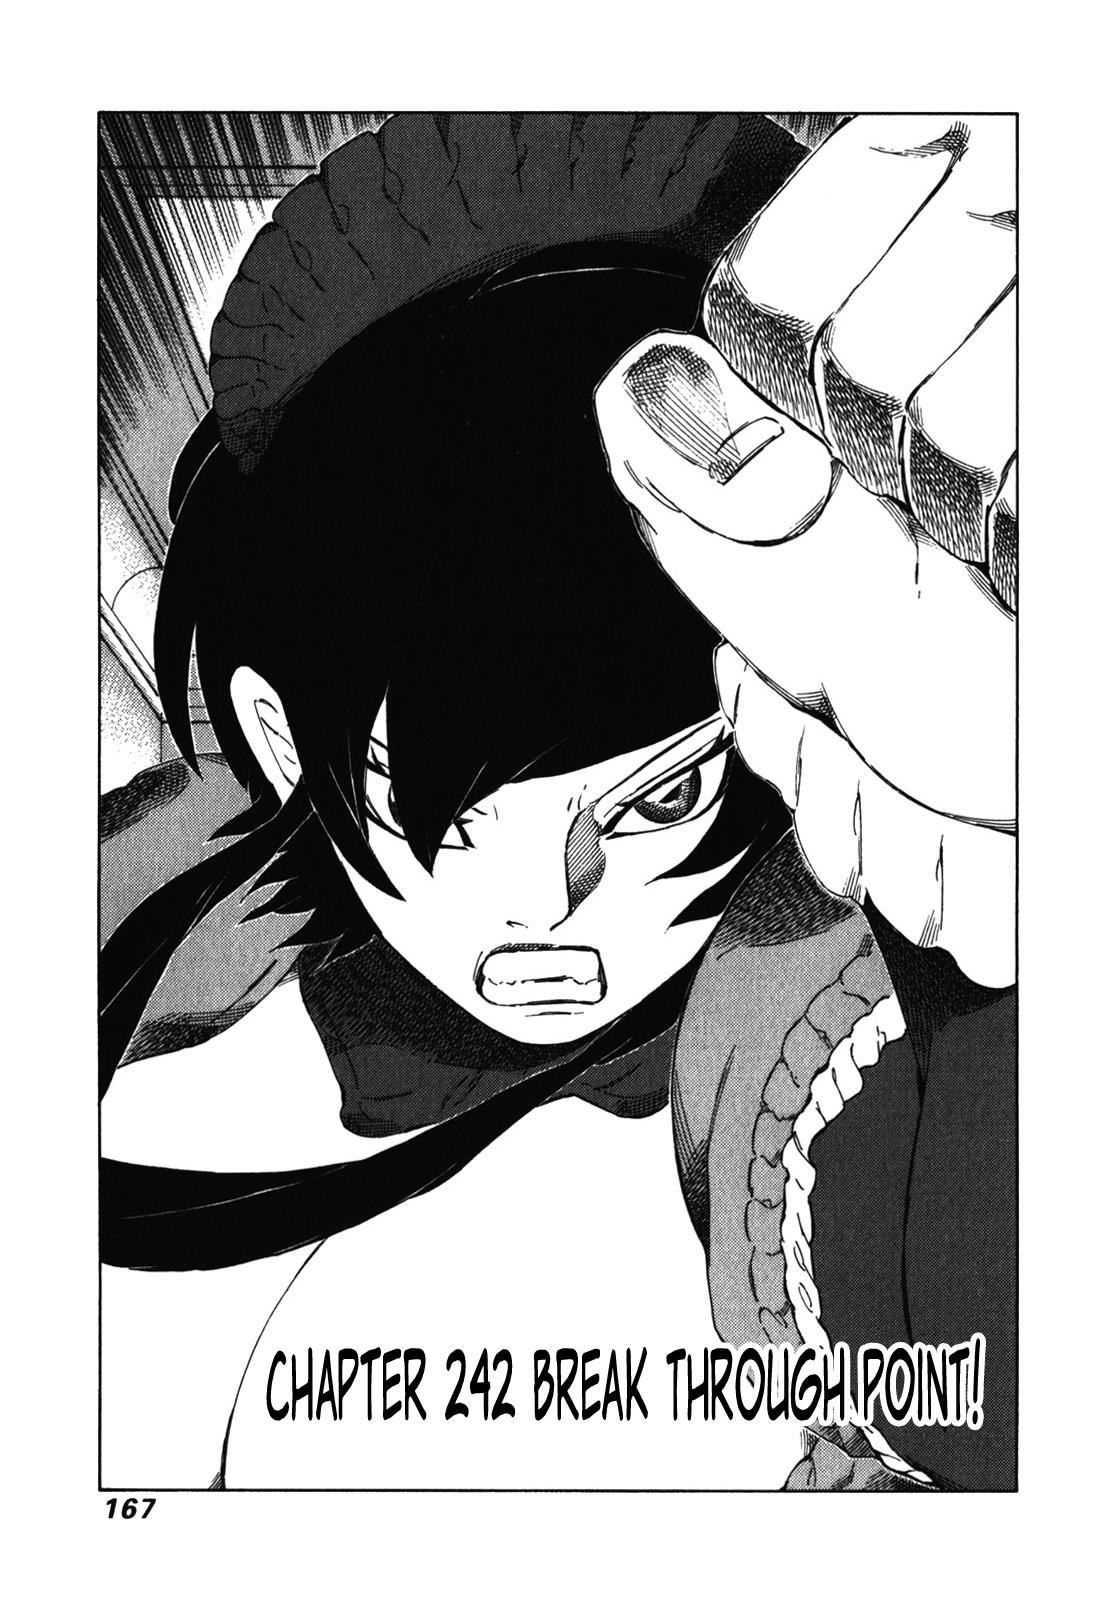 81 Diver Chapter 242 #1